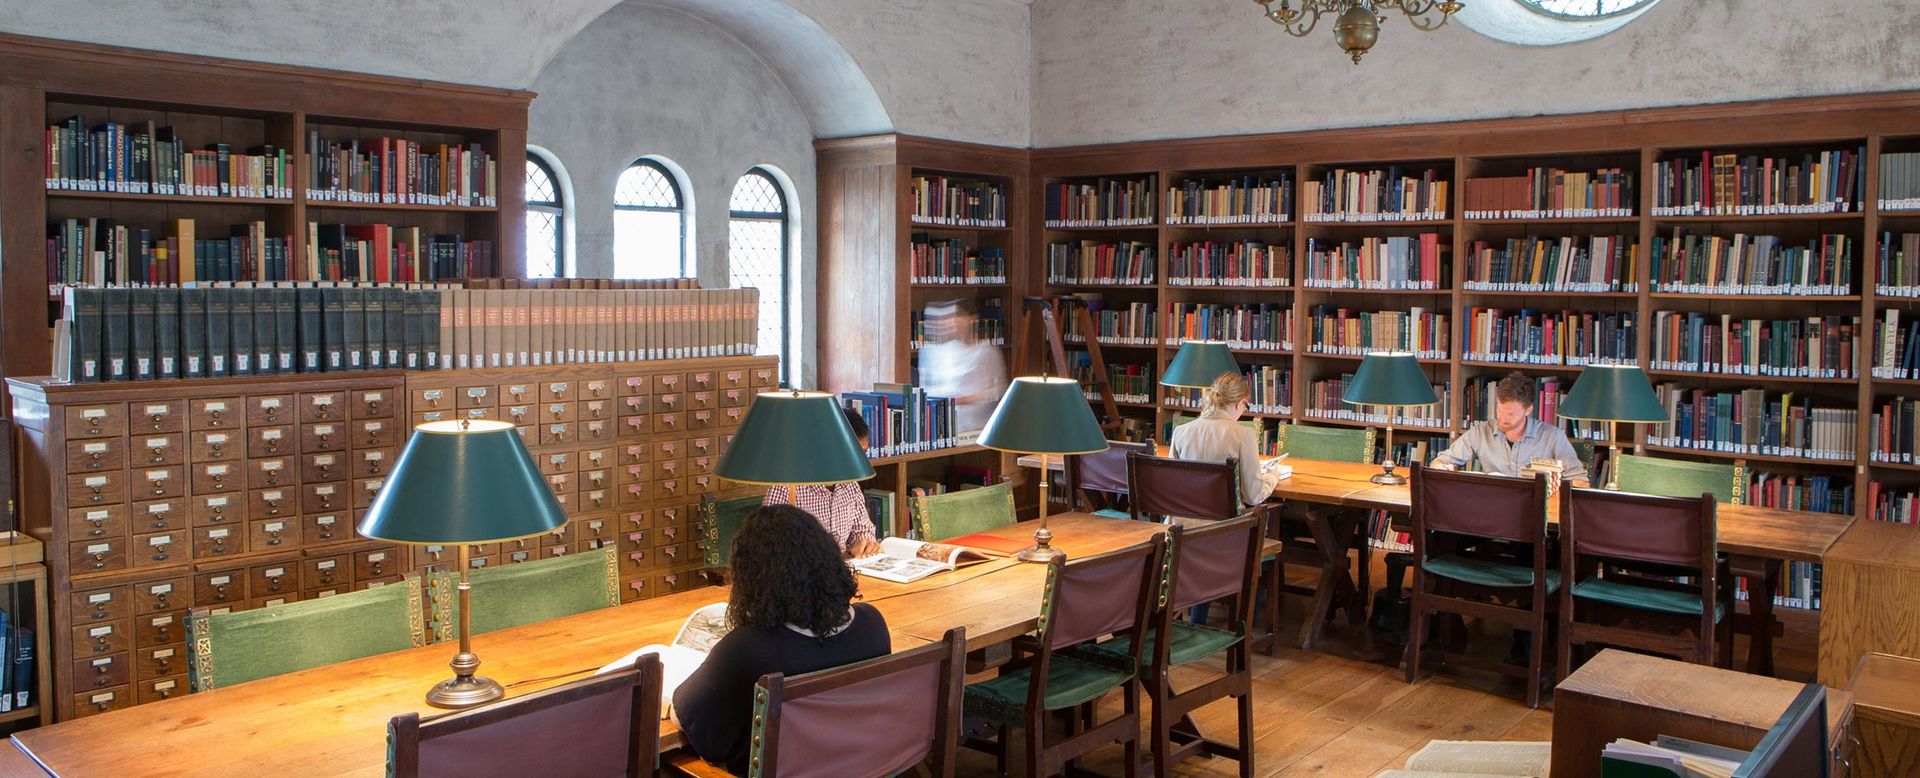 A small library lined with dark wood book shelves and tables with lamps and green upholstered chairs, arched windows, and a stained glass rosette set high in the far wall